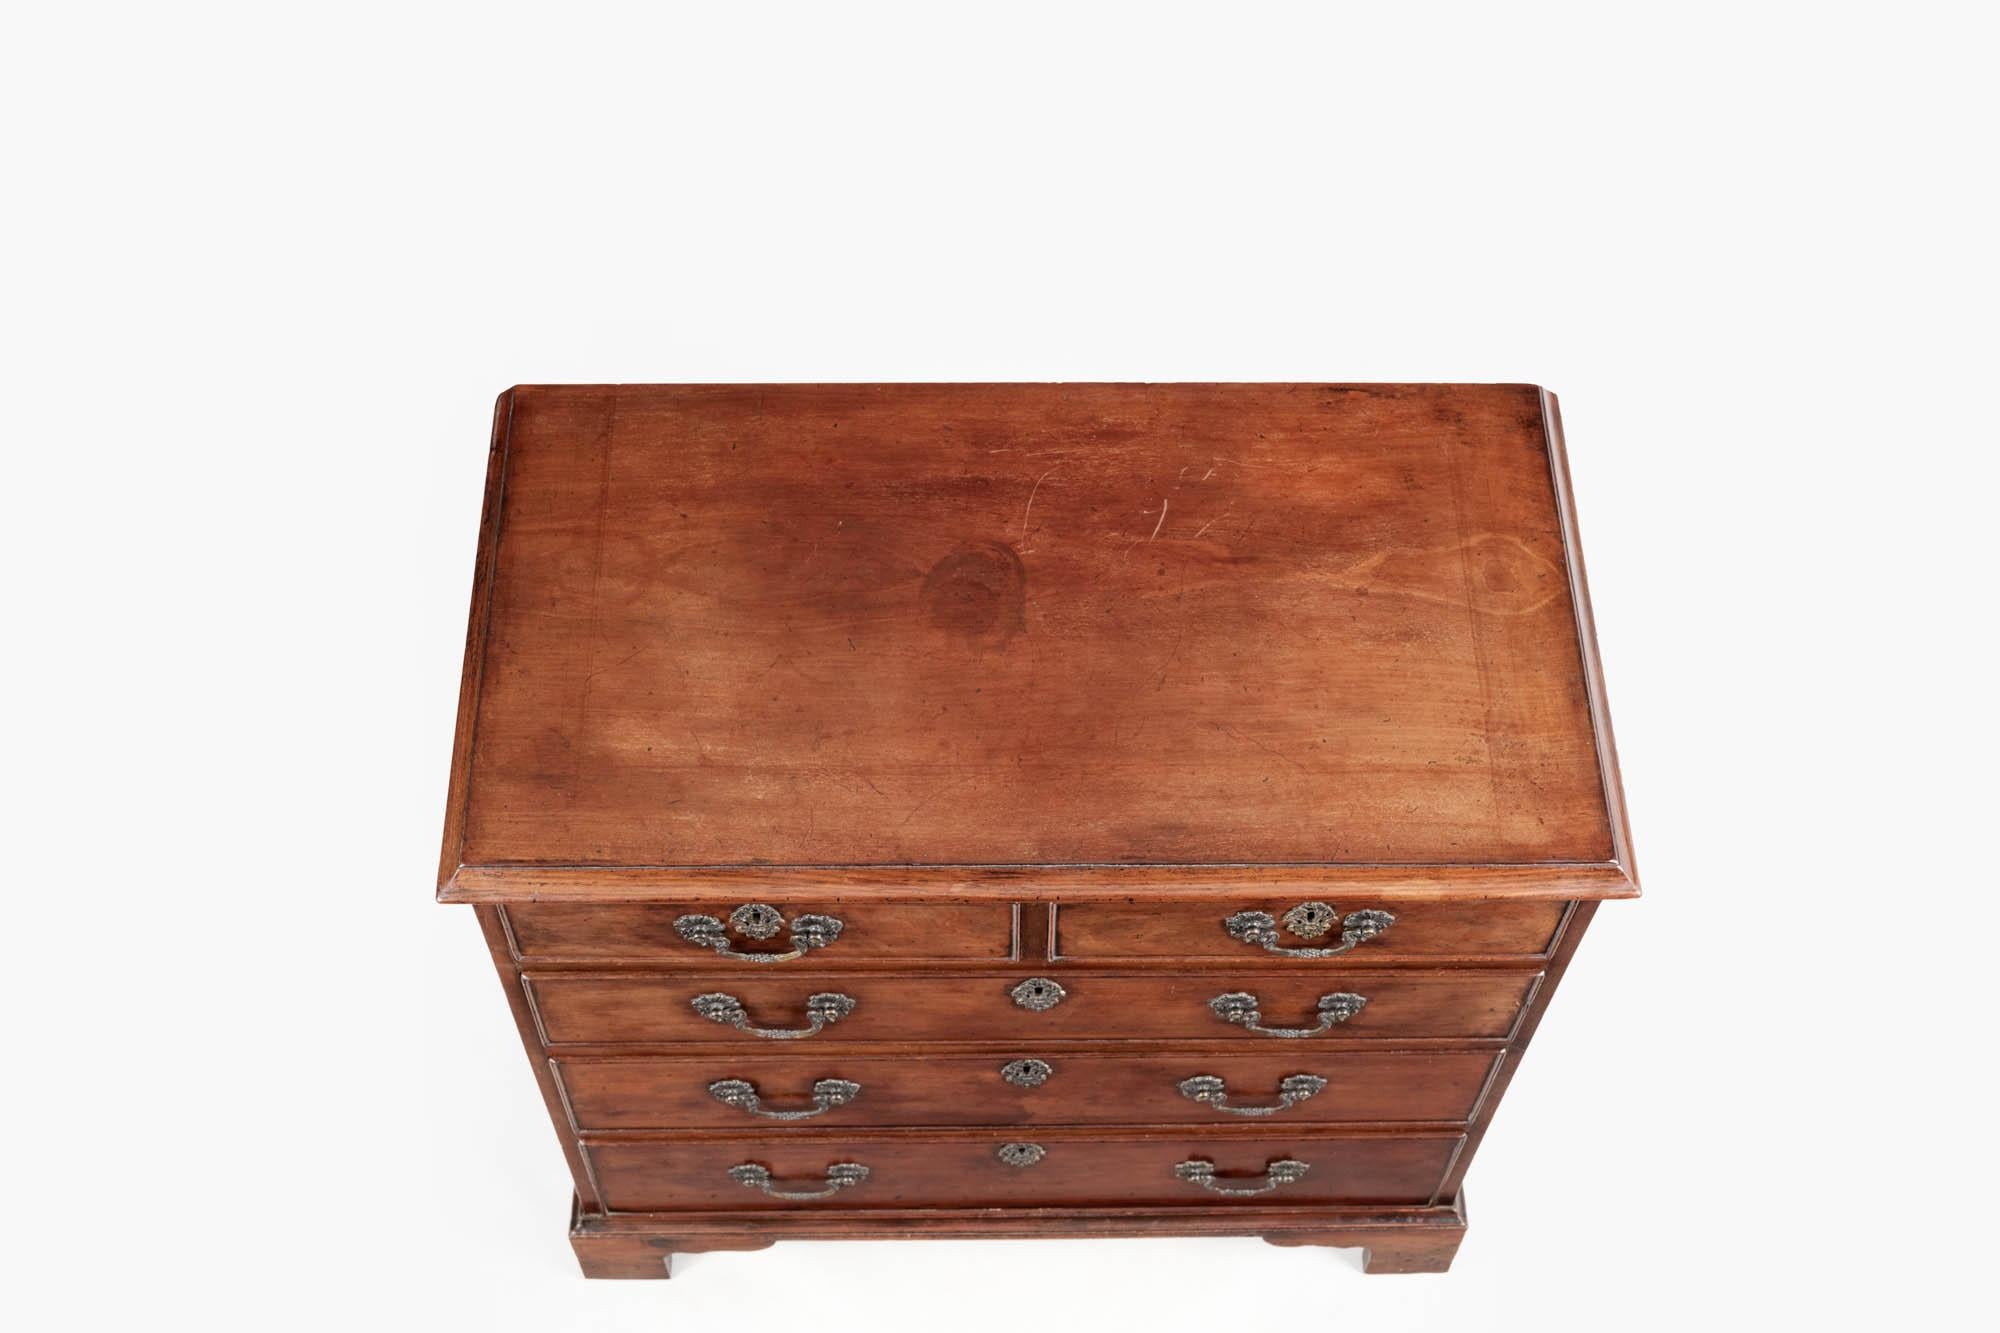 Early 19th century George III bachelor chest, the moulded top raised above two short and three long cockbeaded drawers with brass pulls and escutcheons terminating on ogee bracket feet.